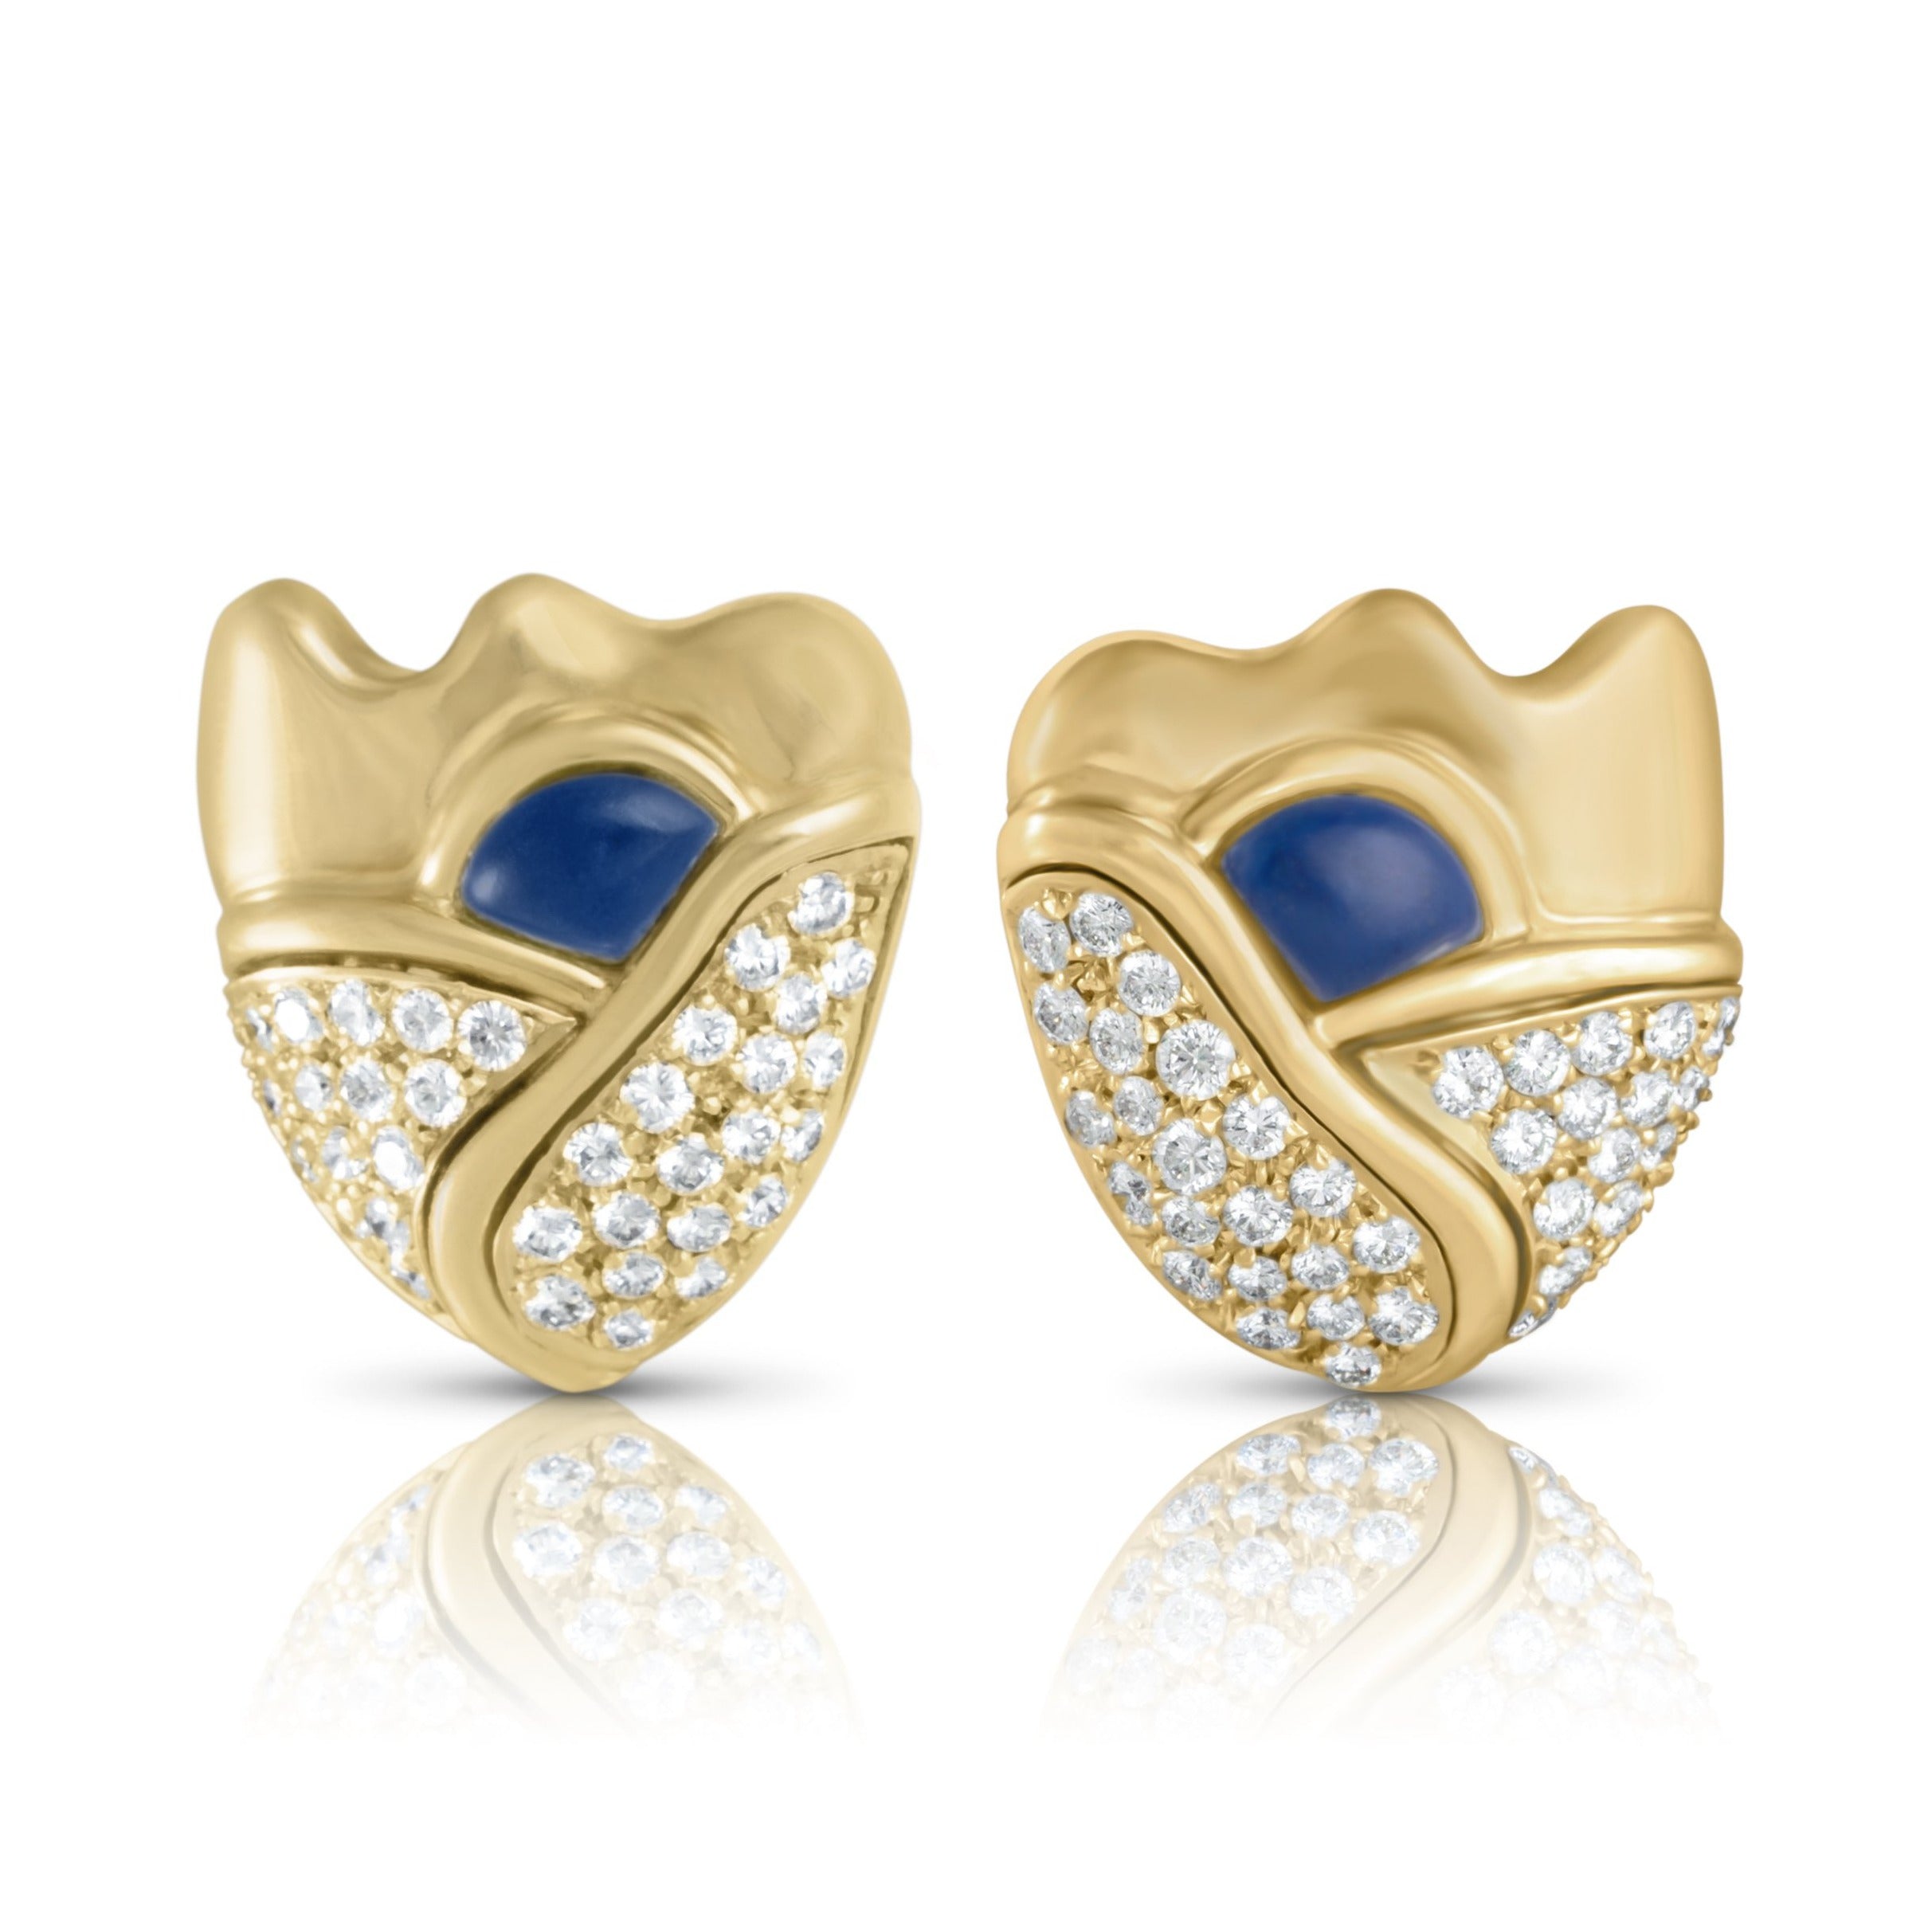 old and diamond flower stud earrings with triangle lapis lazuli cabochon.